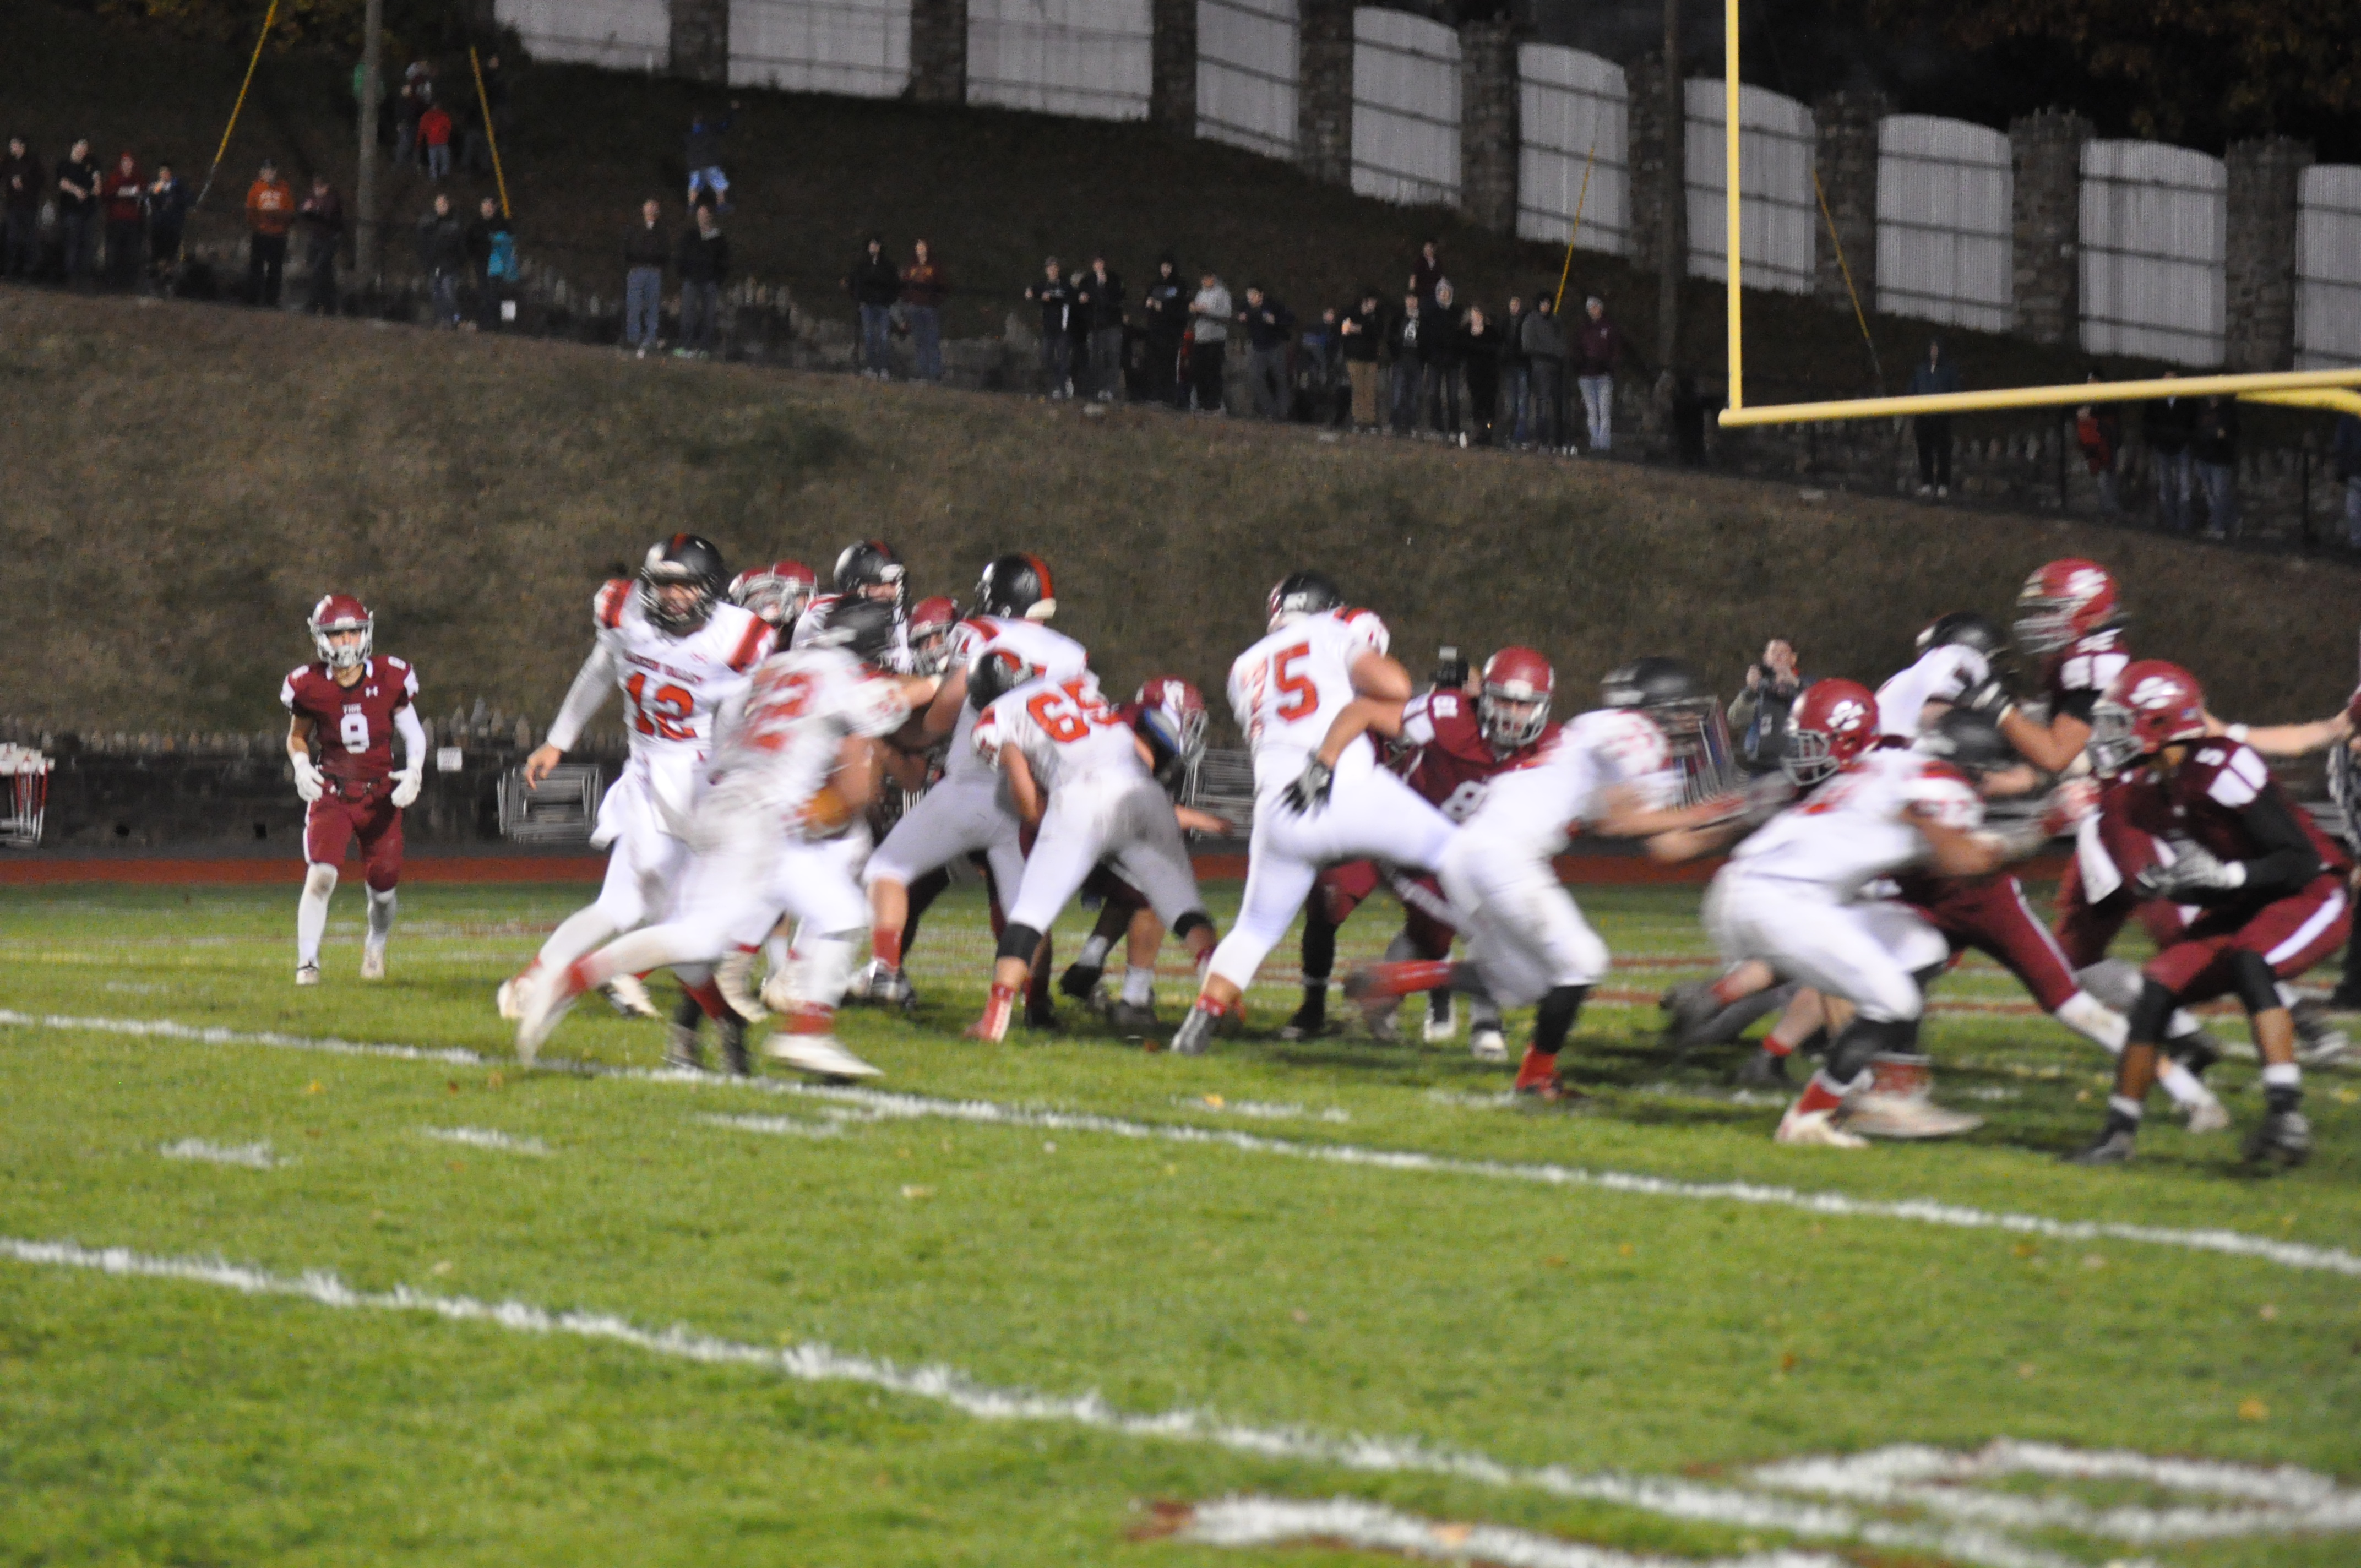 Nate Kehs on his way to touchdown.